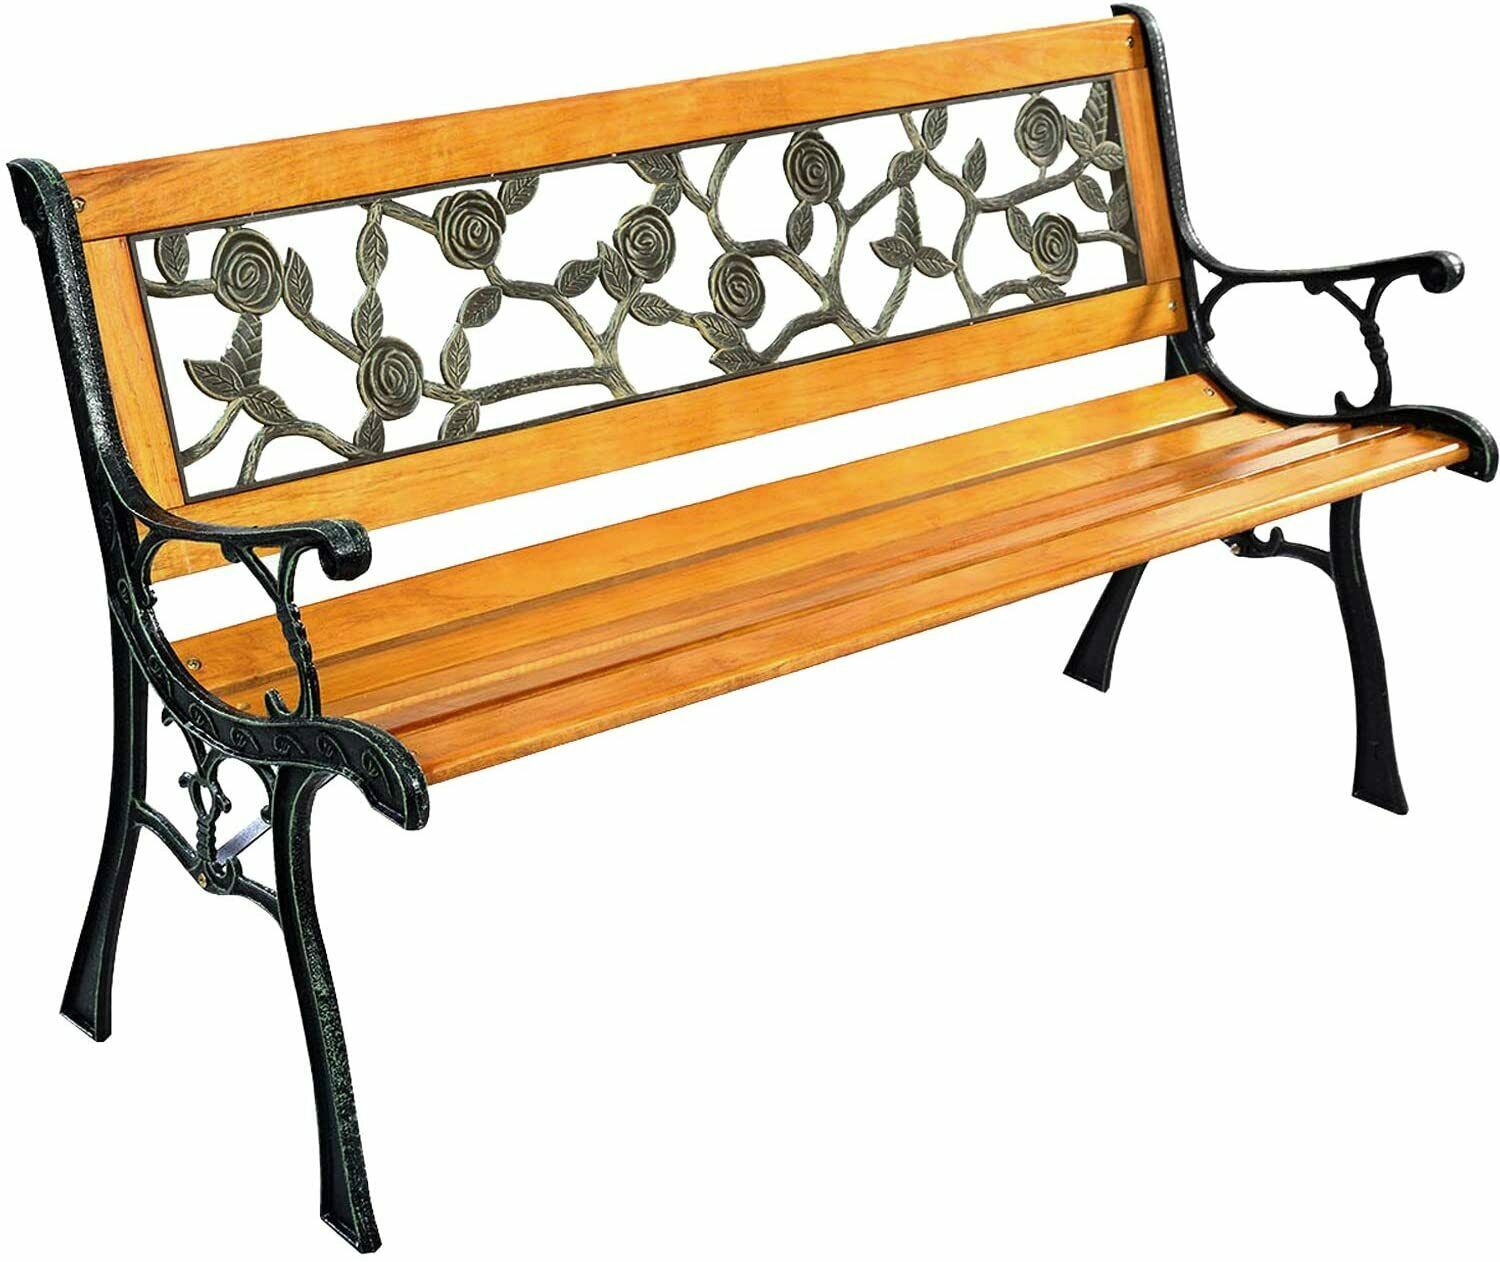 Park Bench Garden Metal Outdoor Furniture Benches Clearance for Patio Yard